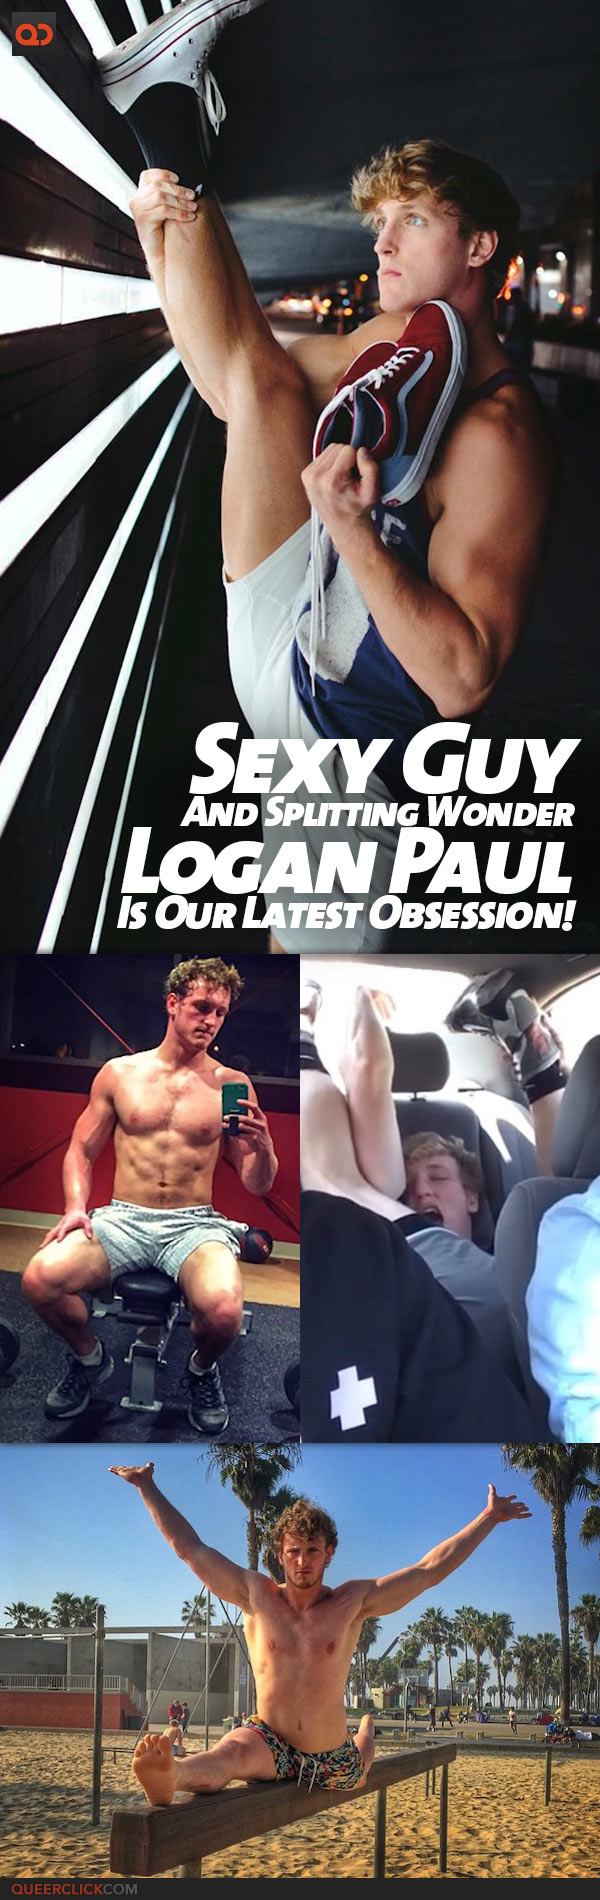 Sexy And Funny Guy Logan Paul Is Our Latest Obsession!